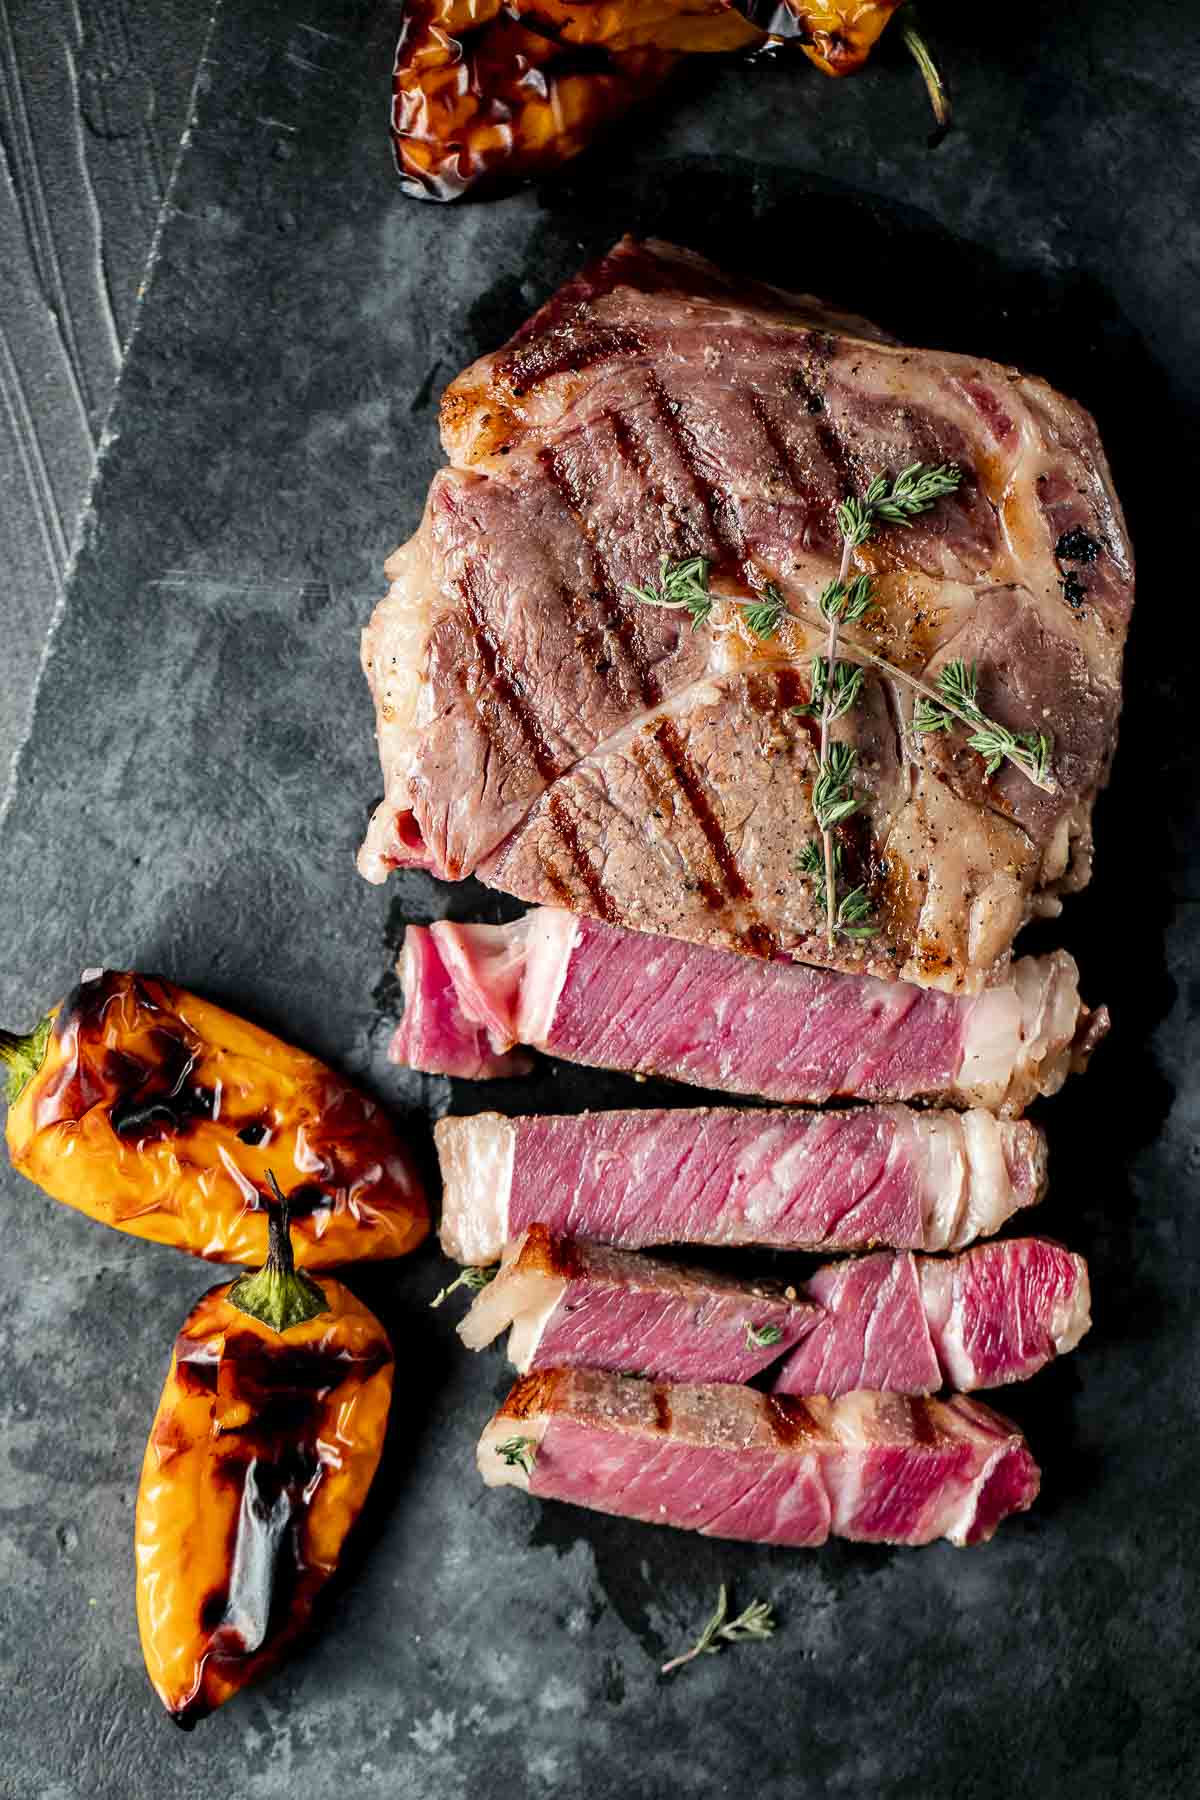 https://www.wenthere8this.com/wp-content/uploads/2022/05/sous-vide-ribeye-3.jpg